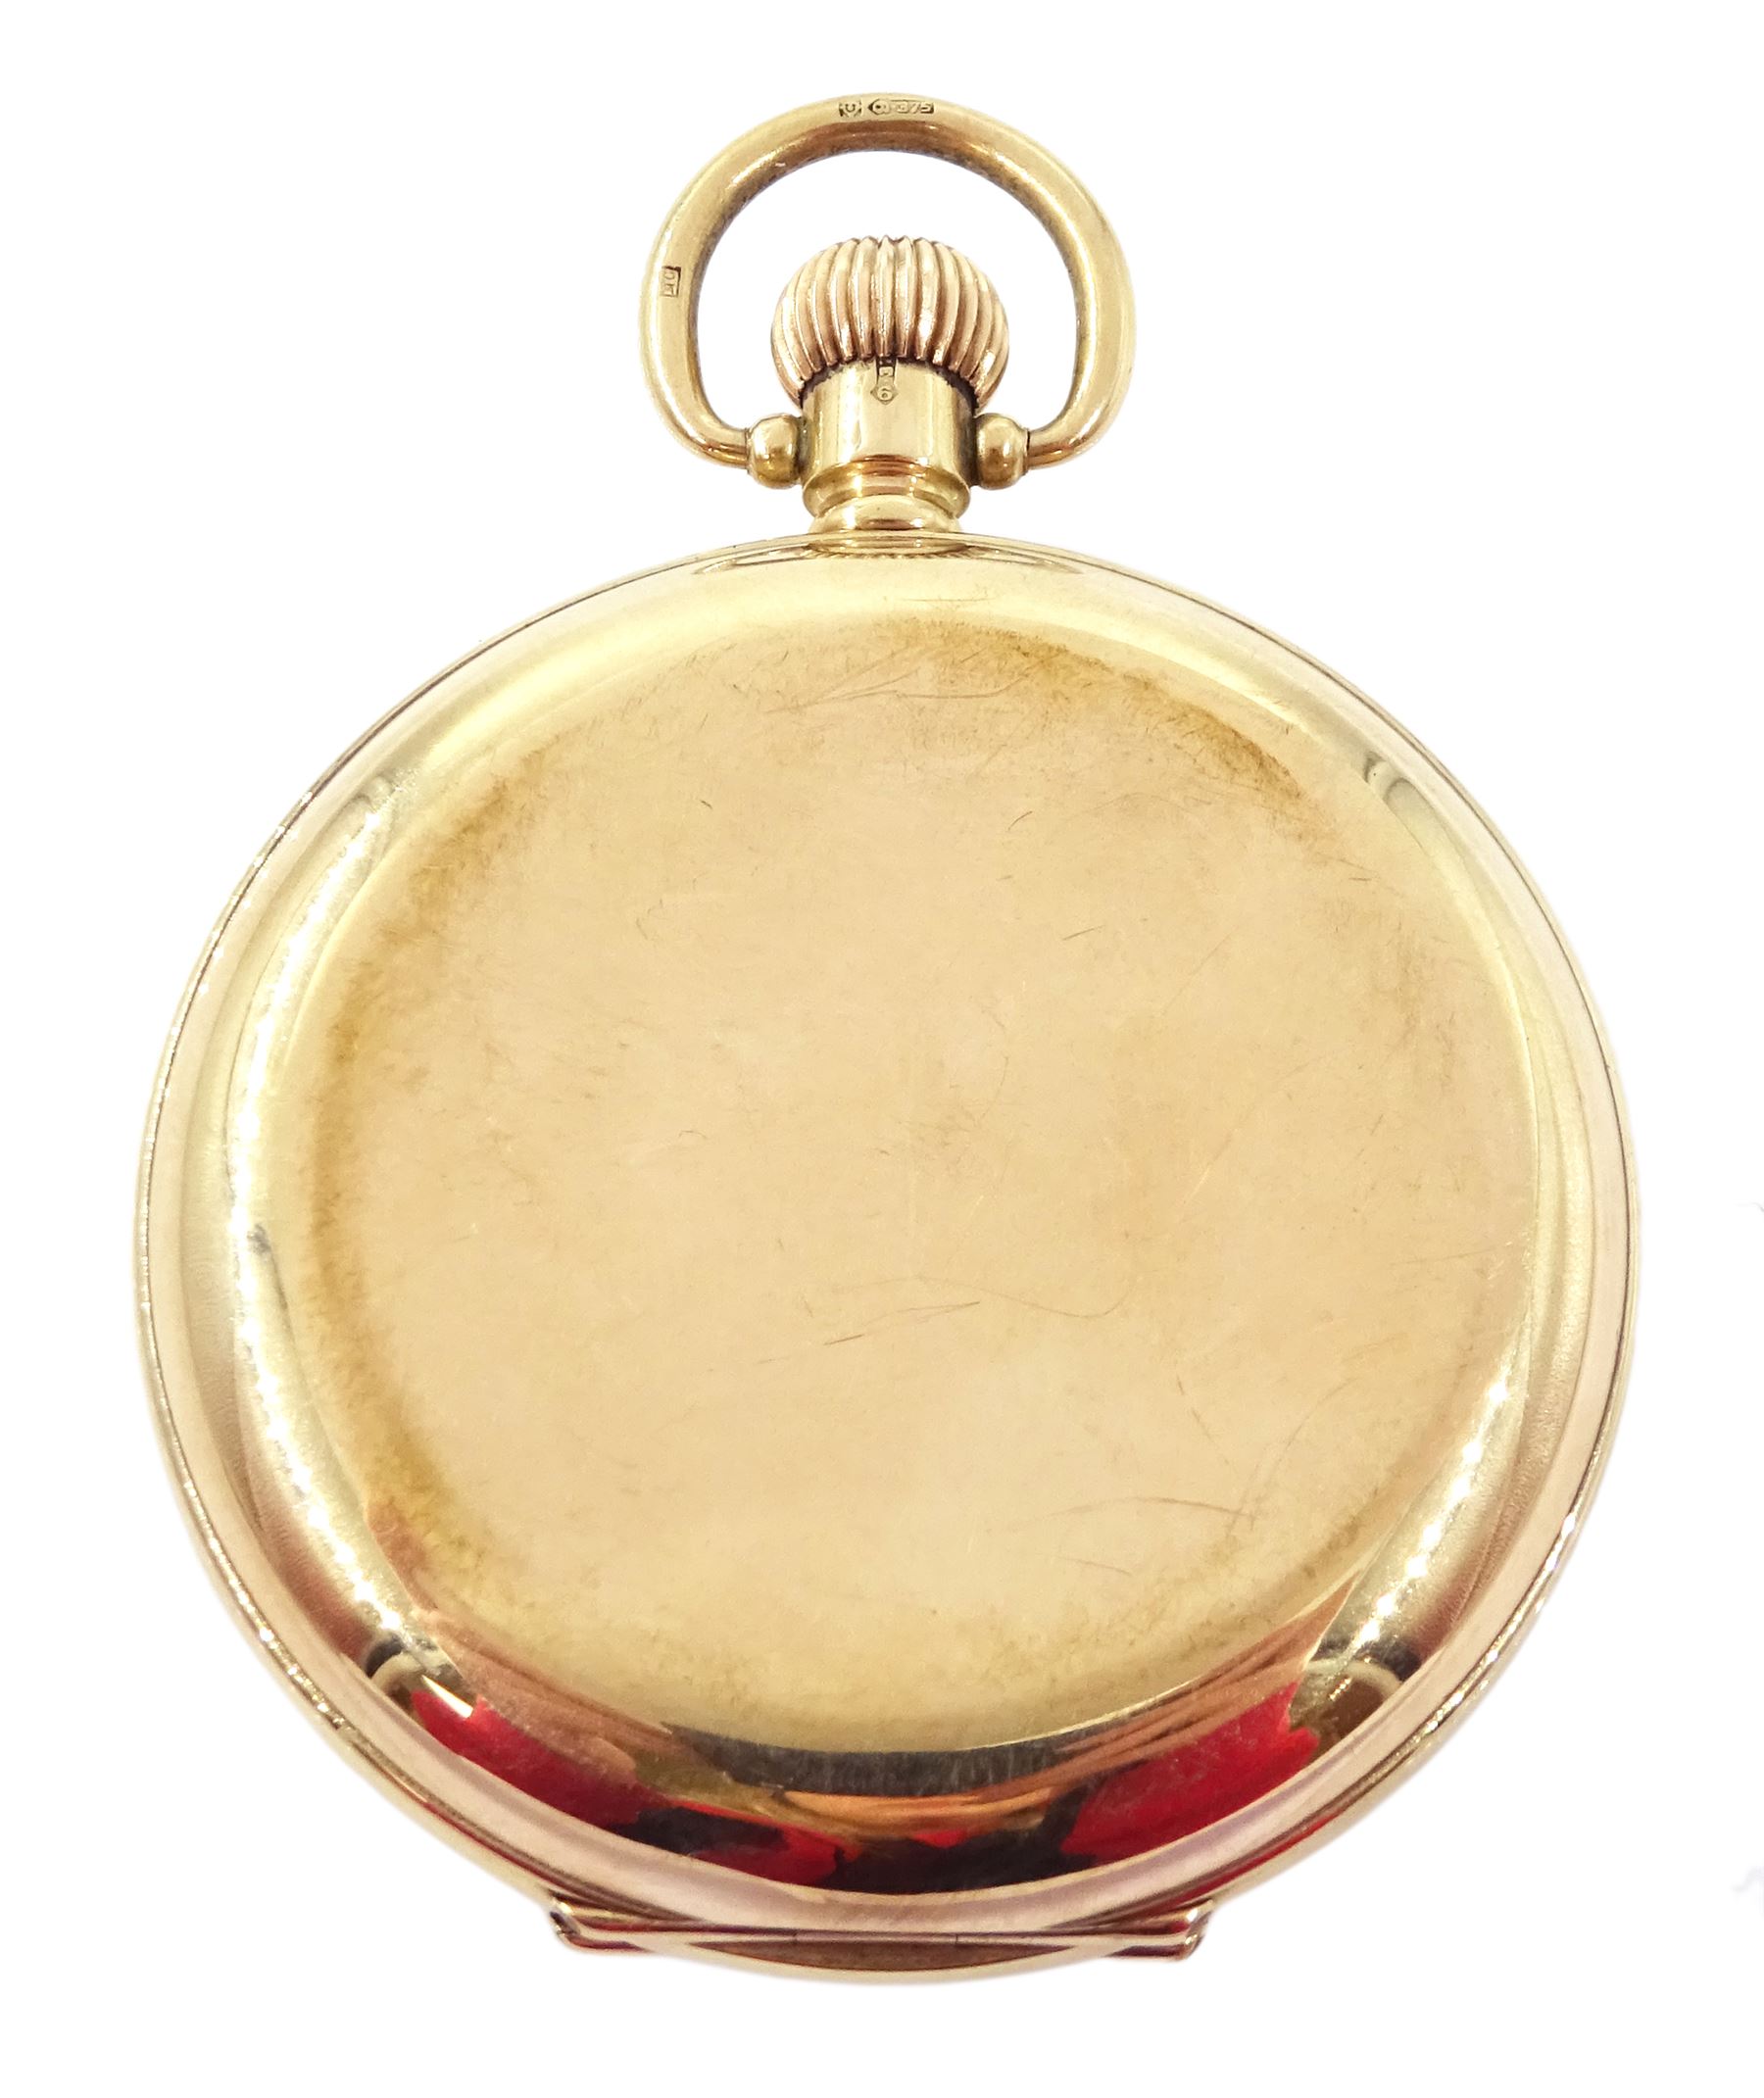 Early 20th century 9ct full hunter lever pocket watch by A Schwarz & Son - Image 2 of 4